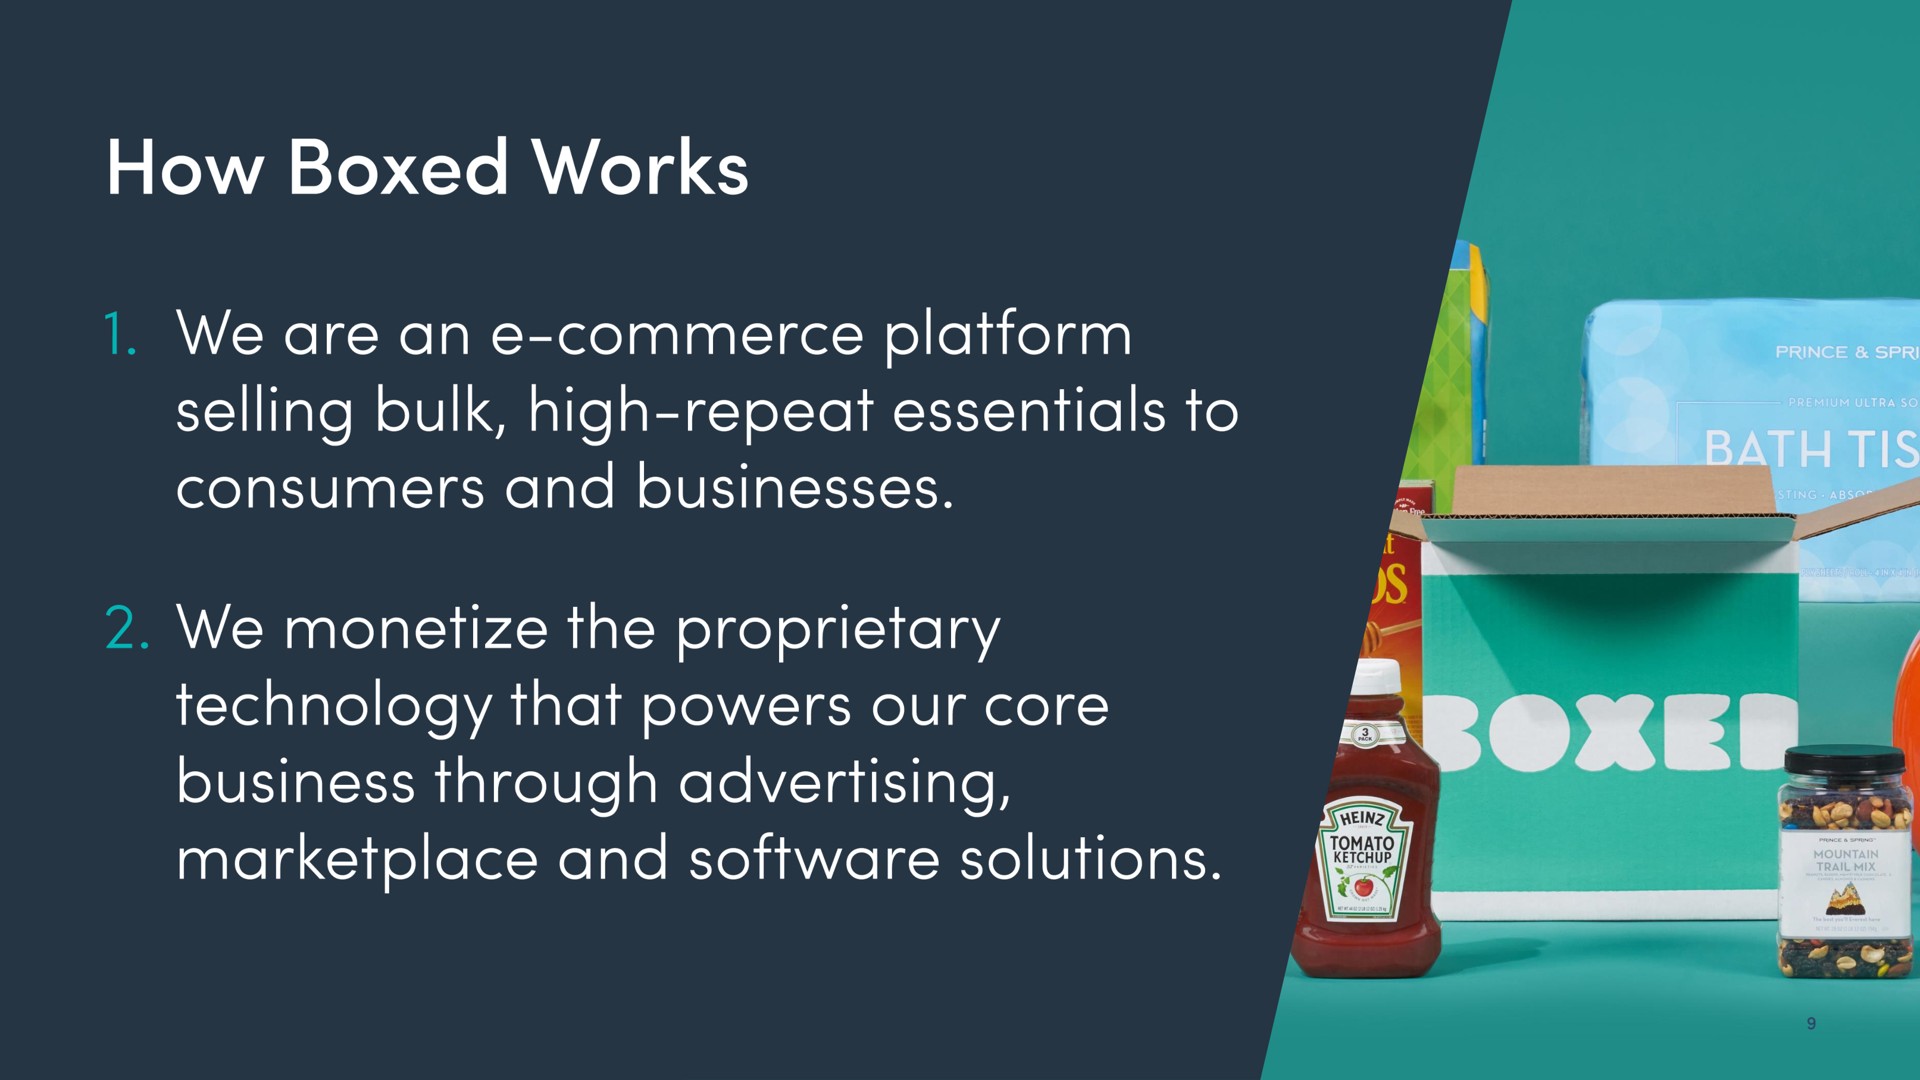 how boxed works we are an commerce platform selling bulk high repeat essentials to consumers and businesses we monetize the proprietary technology that powers our core business through advertising and solutions | Boxed